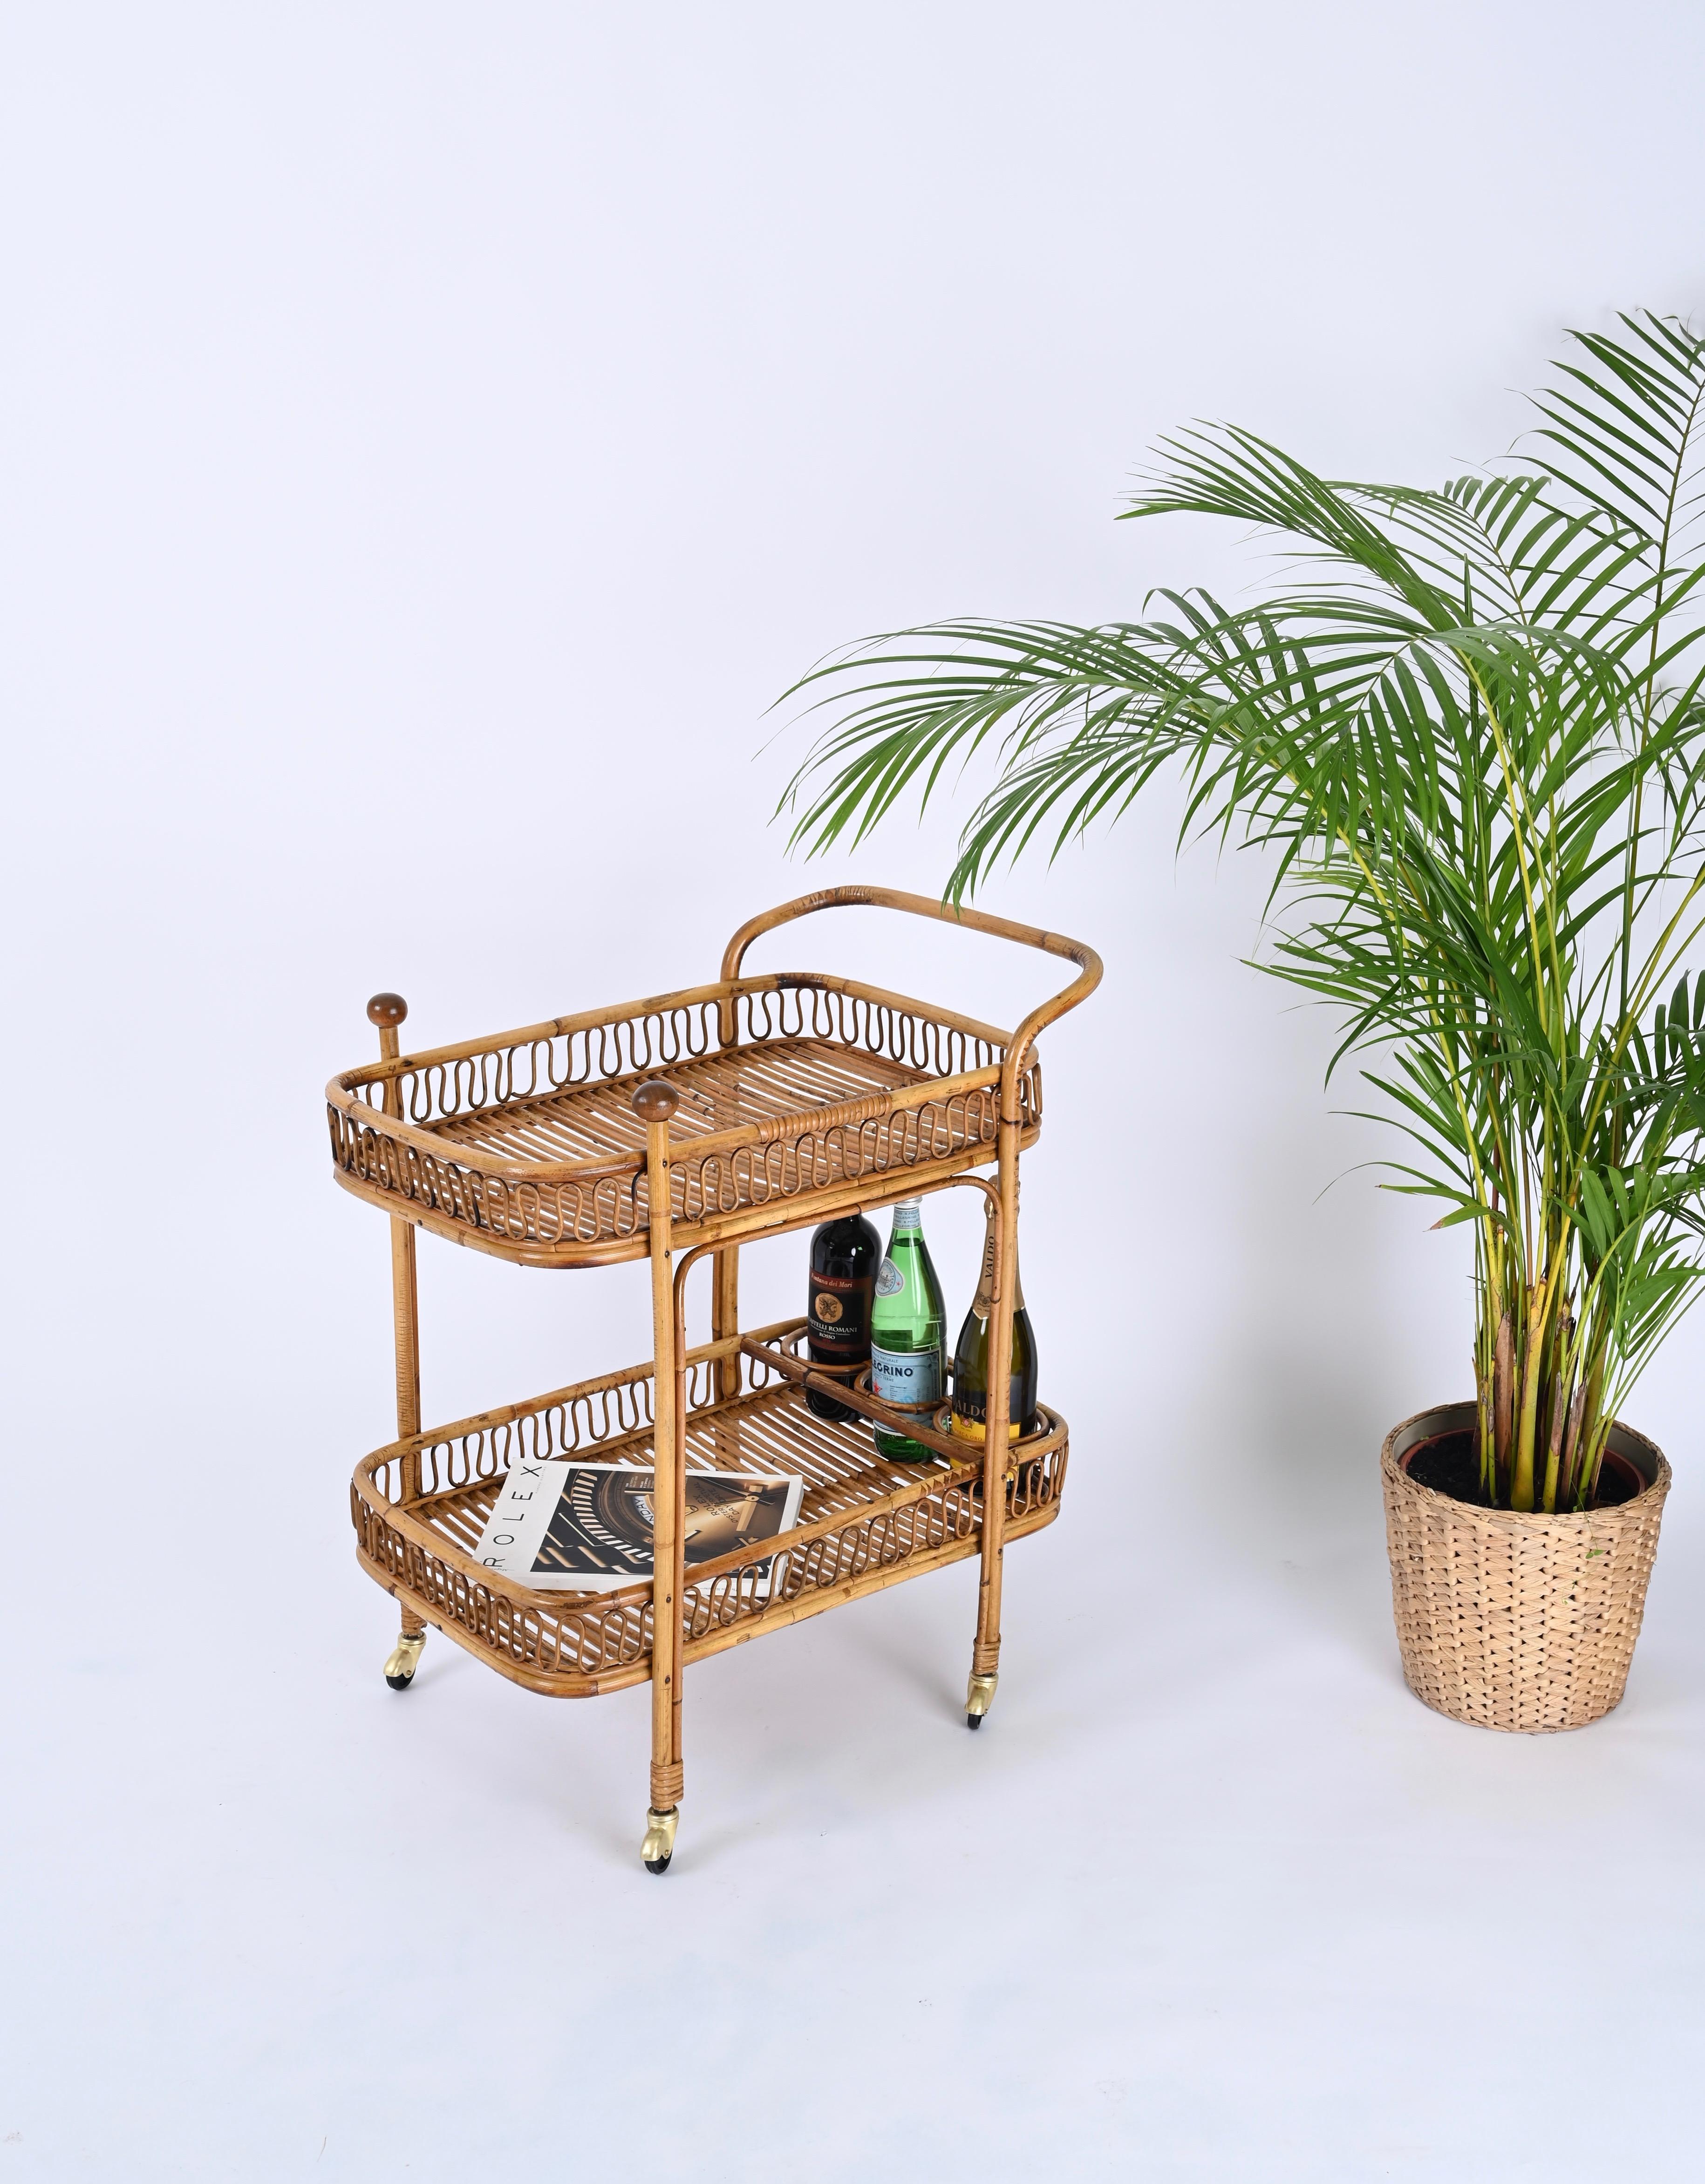 Marvellous mid-century rectangular bar cart trolley fully made in bamboo, curved rattan and wicker. This unique piece was hand-made with perfect proportions, great example of fine Italian craftsmanship from the 60s.

A wonderful piece with